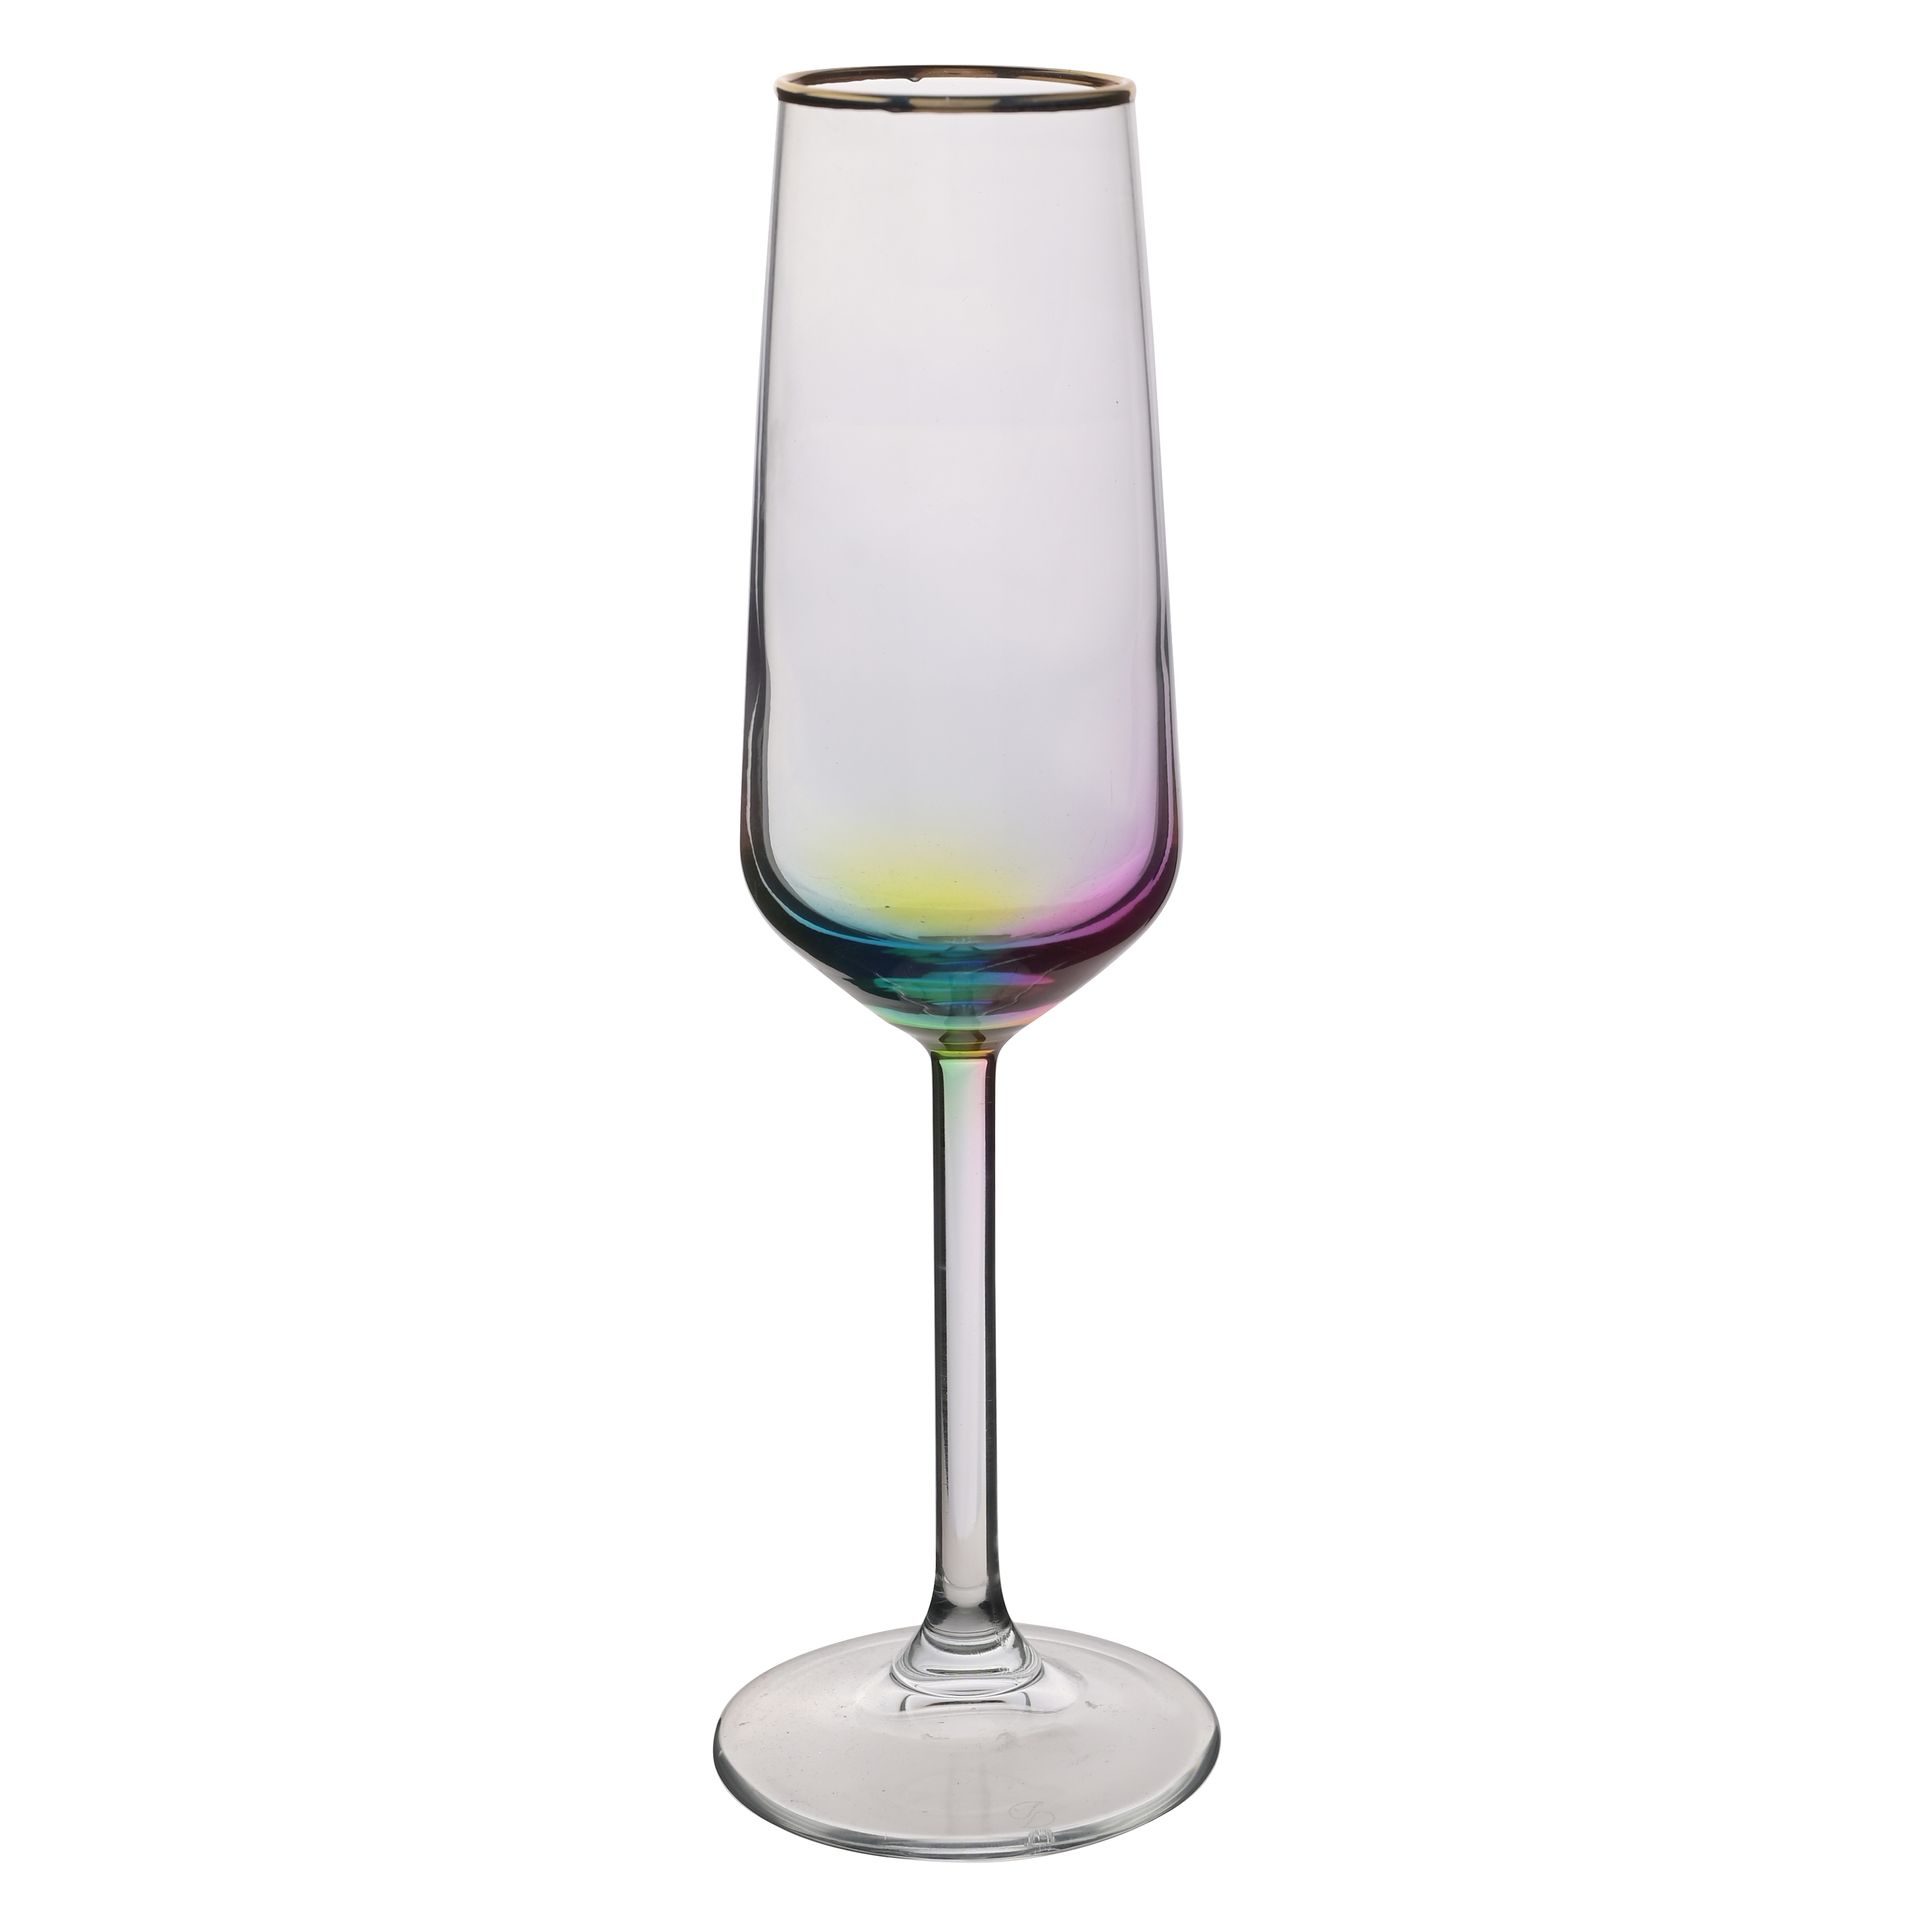 &Quirky Rainbow Champagne Flute Glass